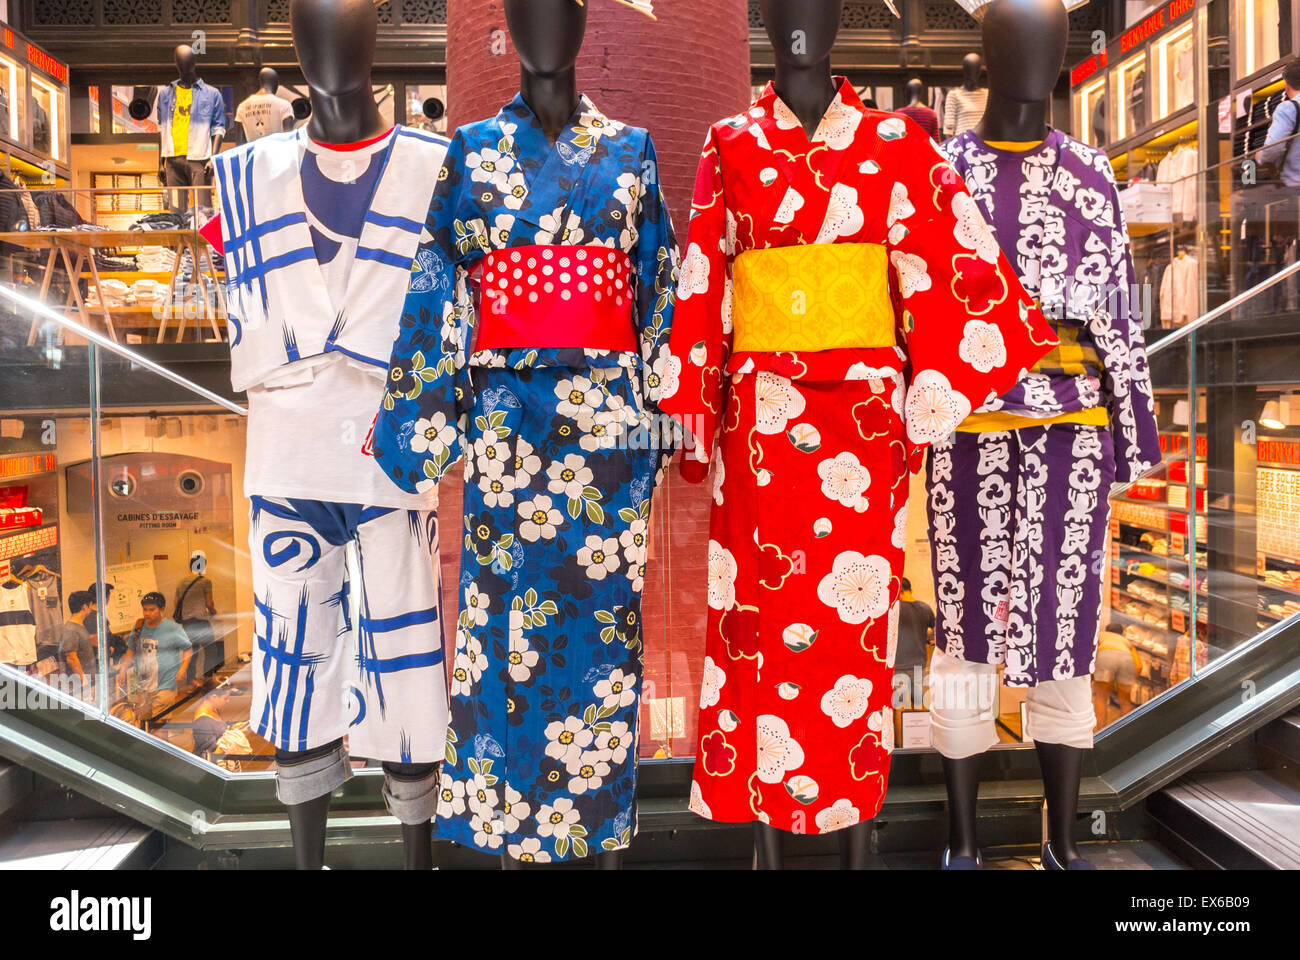 Paris, France, Shop Display in the Marais District. Inside "Uniqlo"  Clothing Store, Display Japanese Culture, Kimono Traditional Dresses Stock  Photo - Alamy